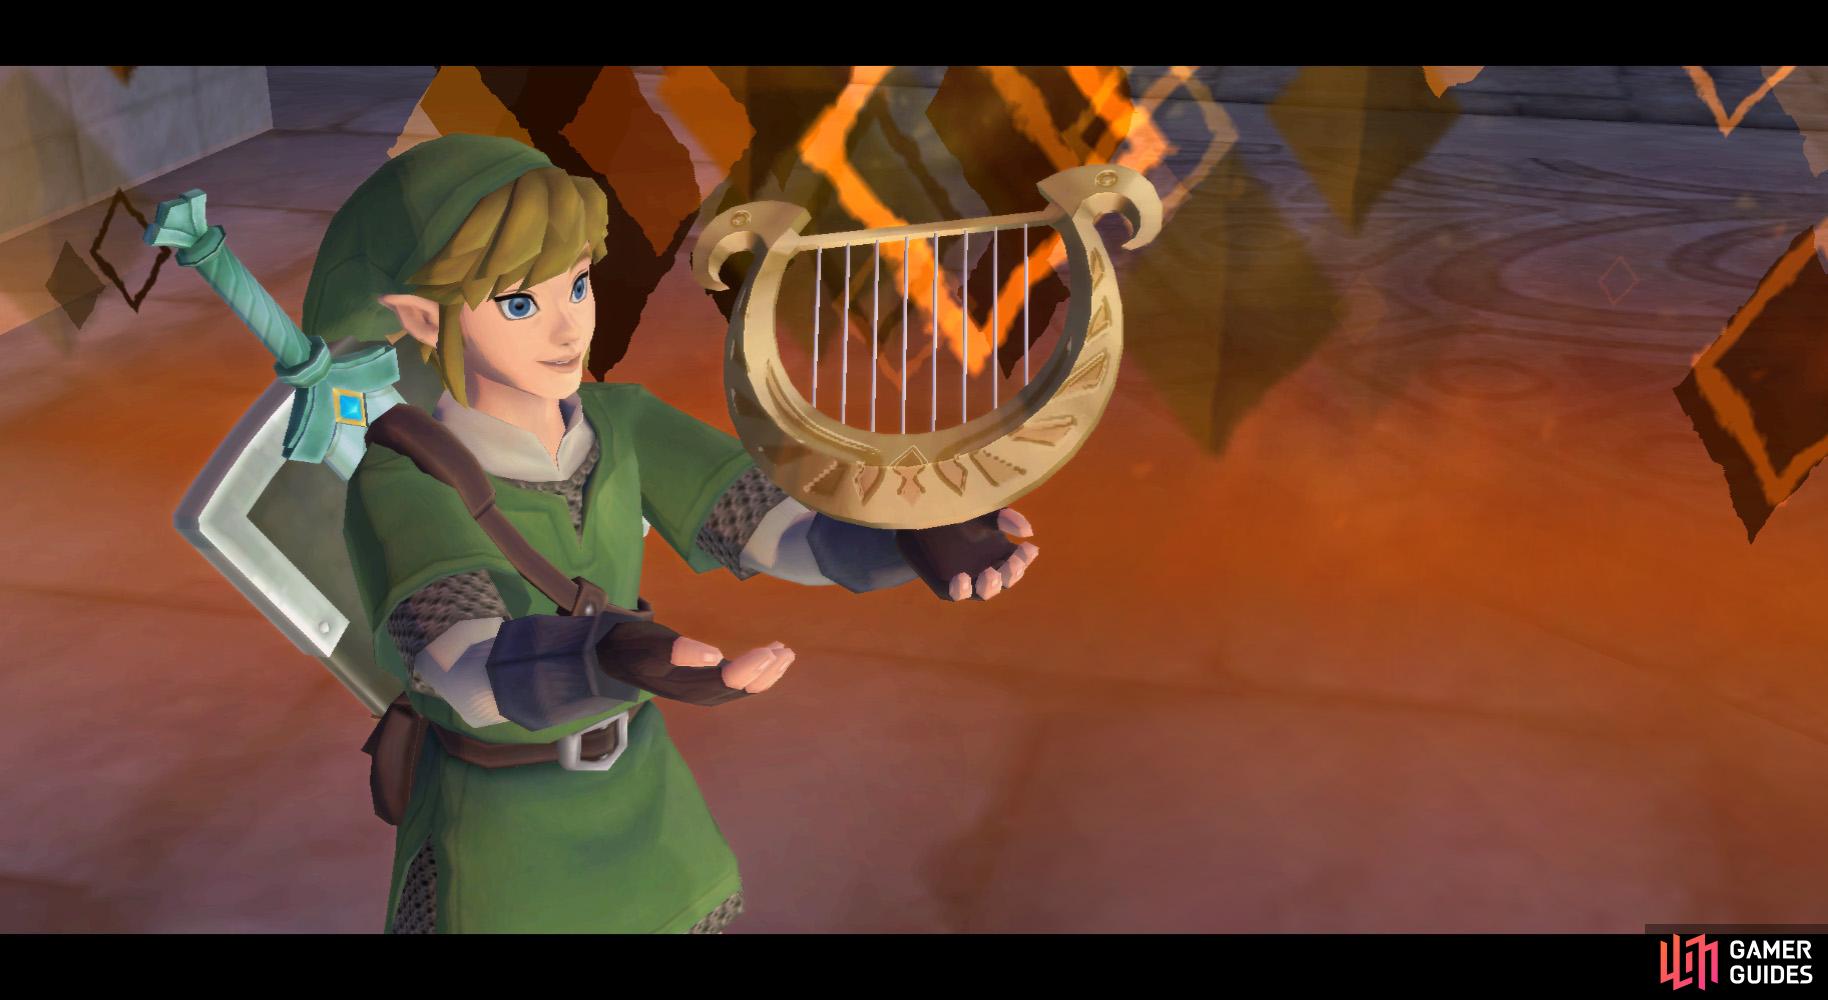 No Zelda for you today, Link, but you can keep her harp.